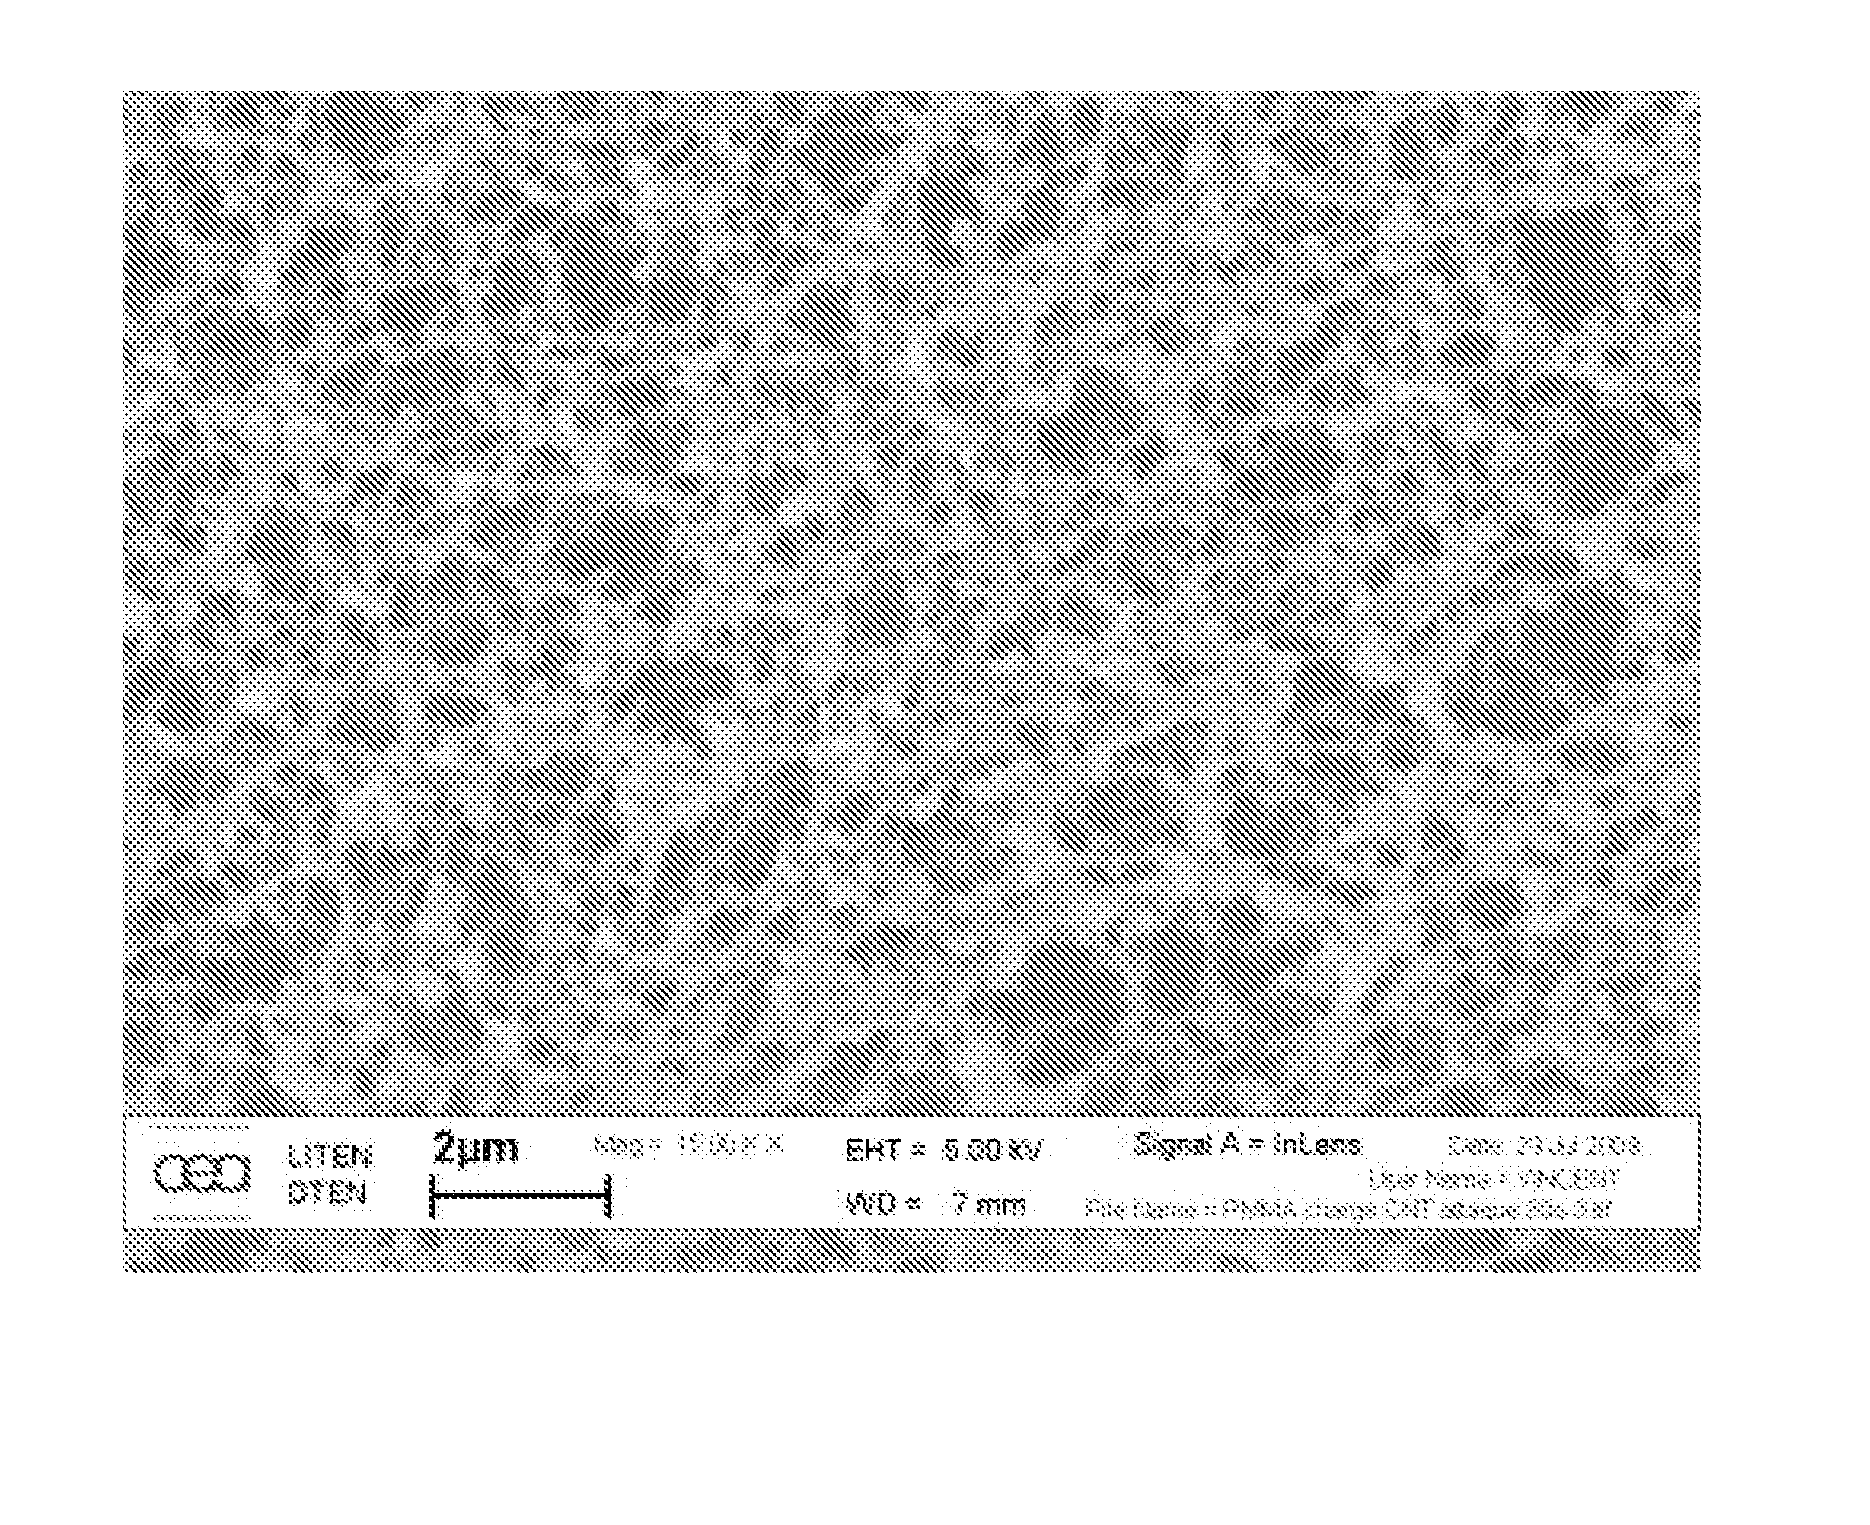 Method for preparing a silicon/carbon composite material, material so prepared, and electrode, in particular negative electrode, comprising said material